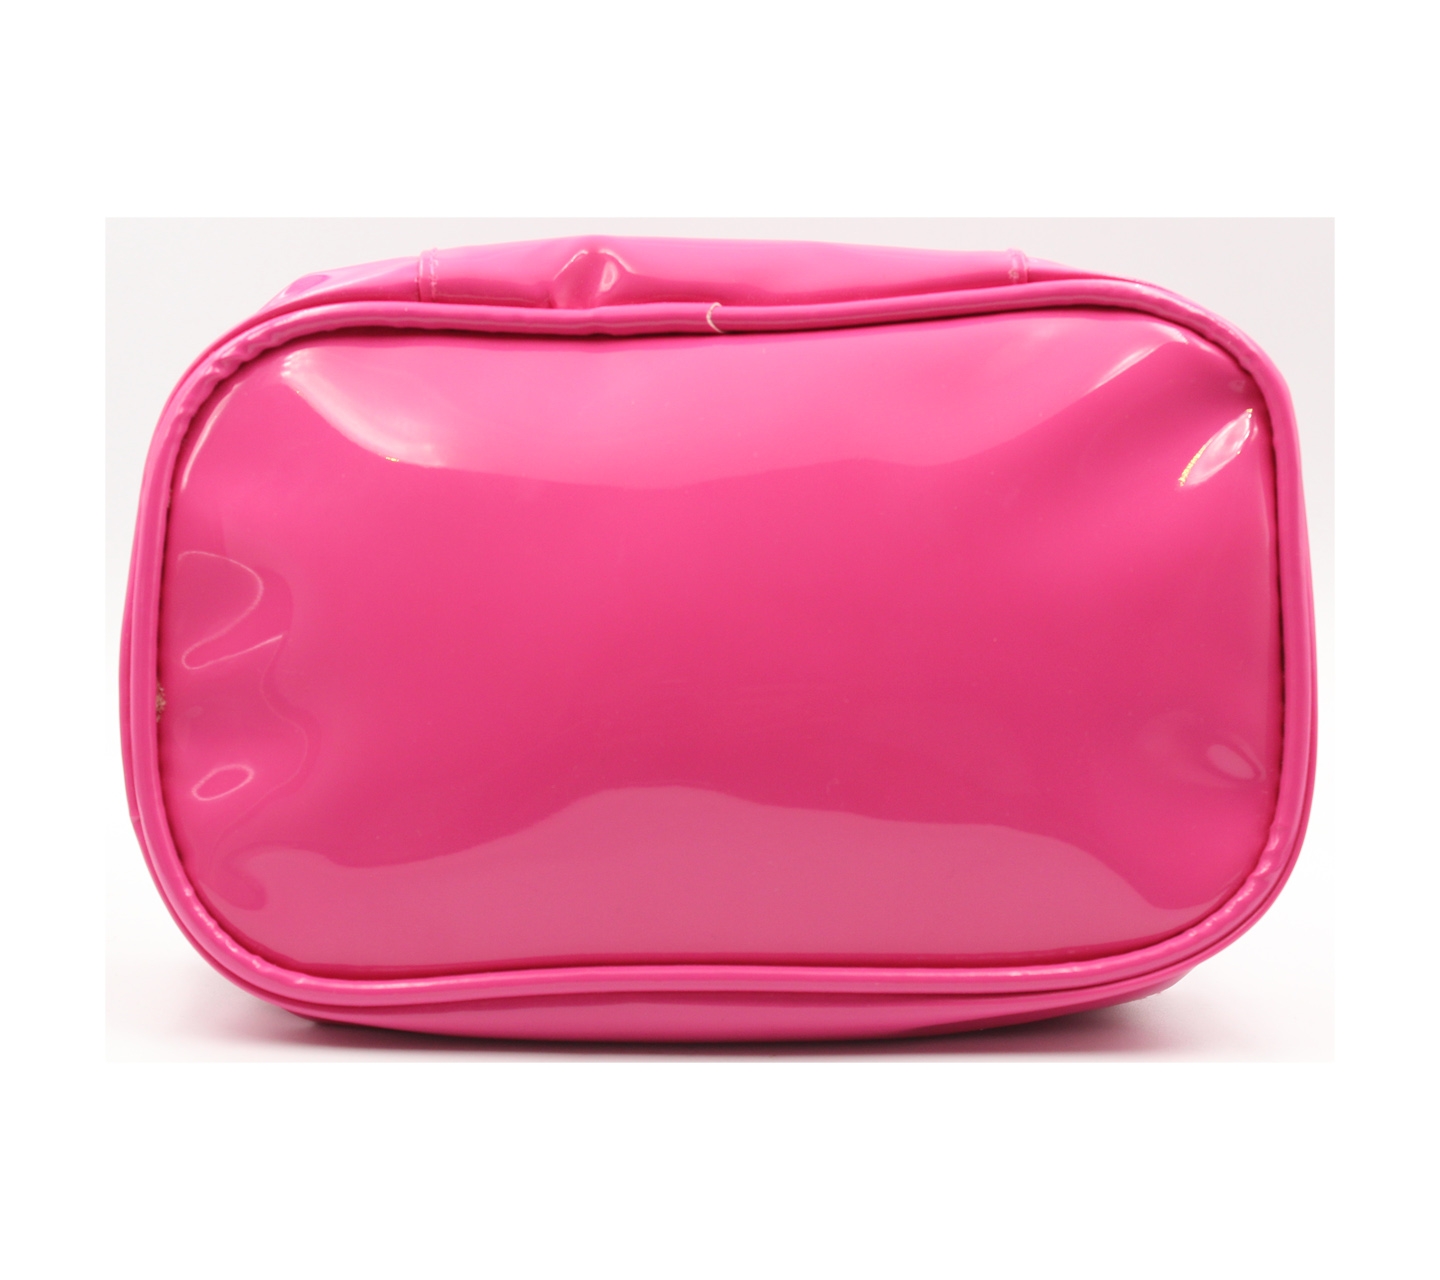 Etude House Pink Pouch